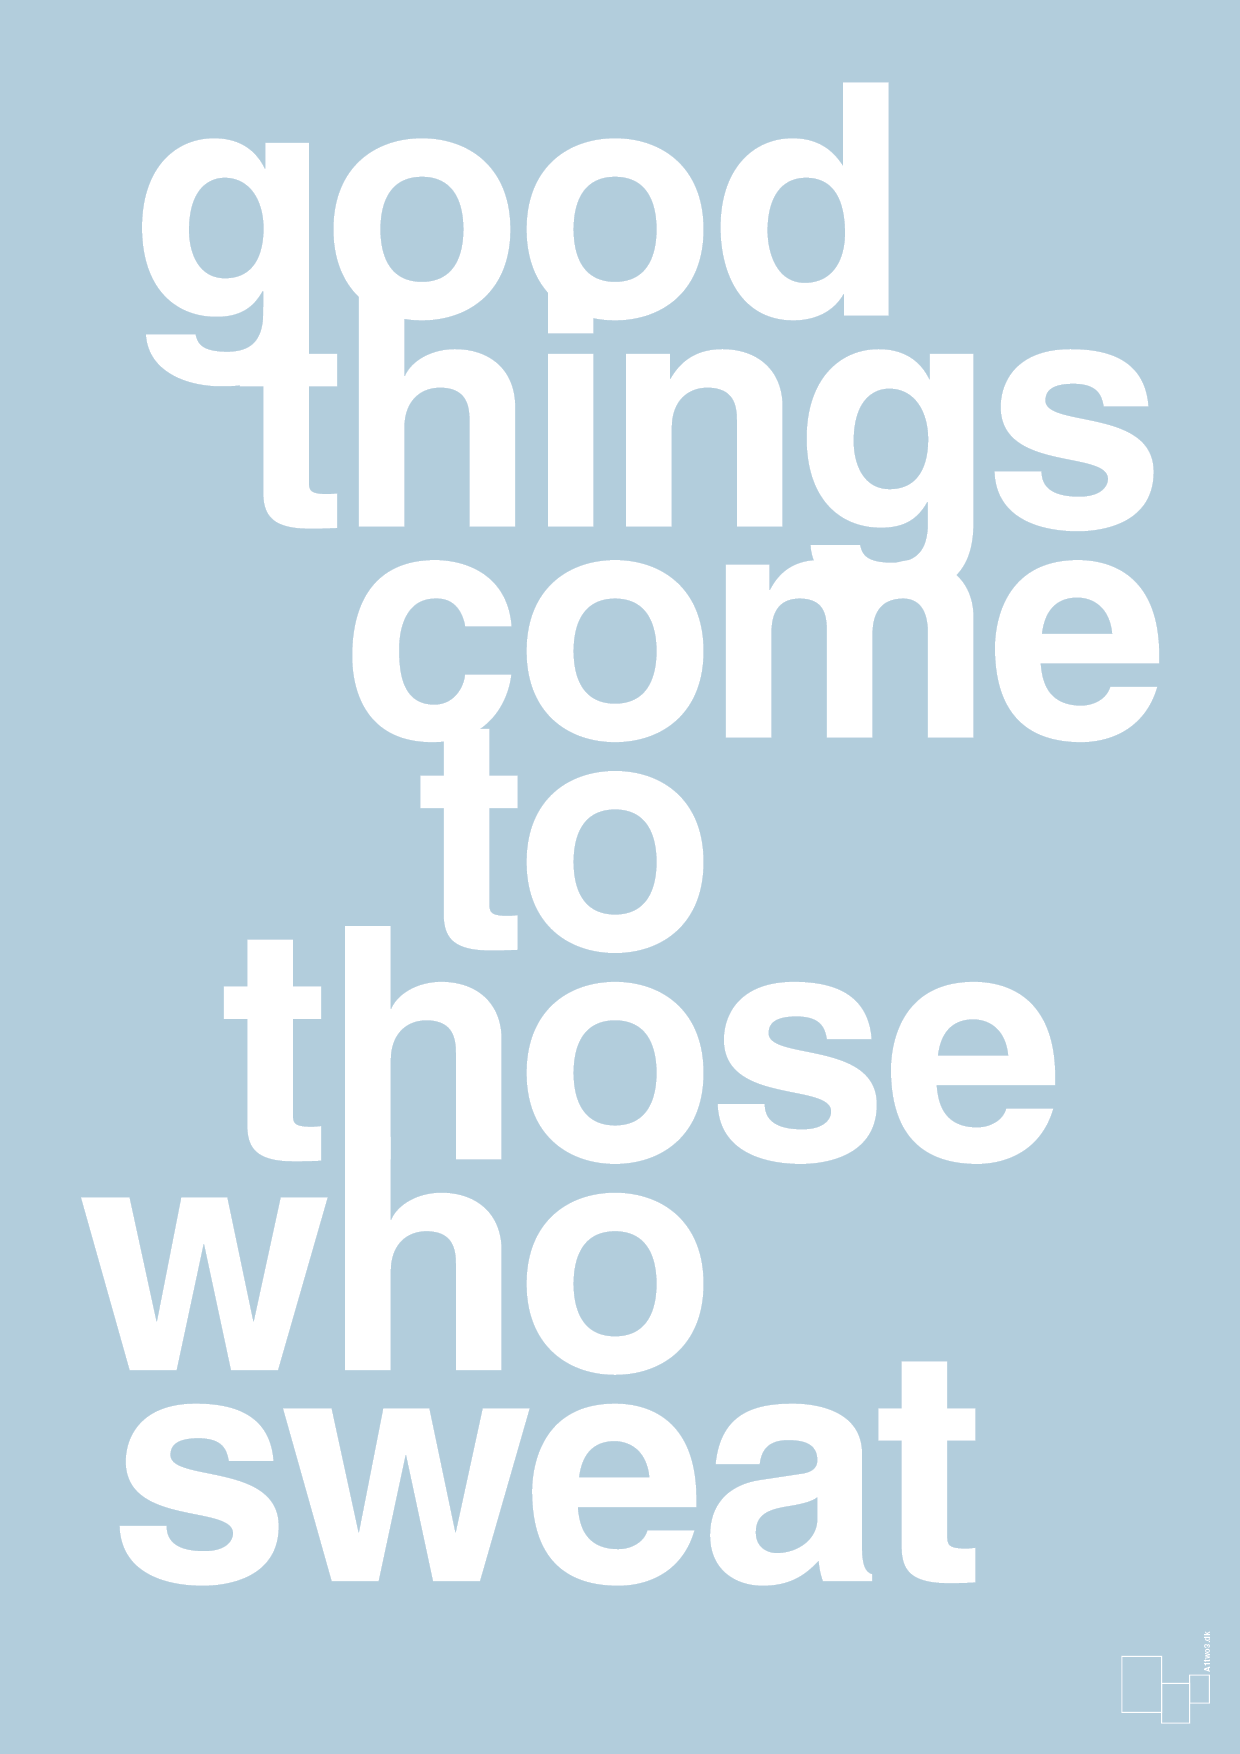 good things come to those who sweat - Plakat med Sport & Fritid i Heavenly Blue